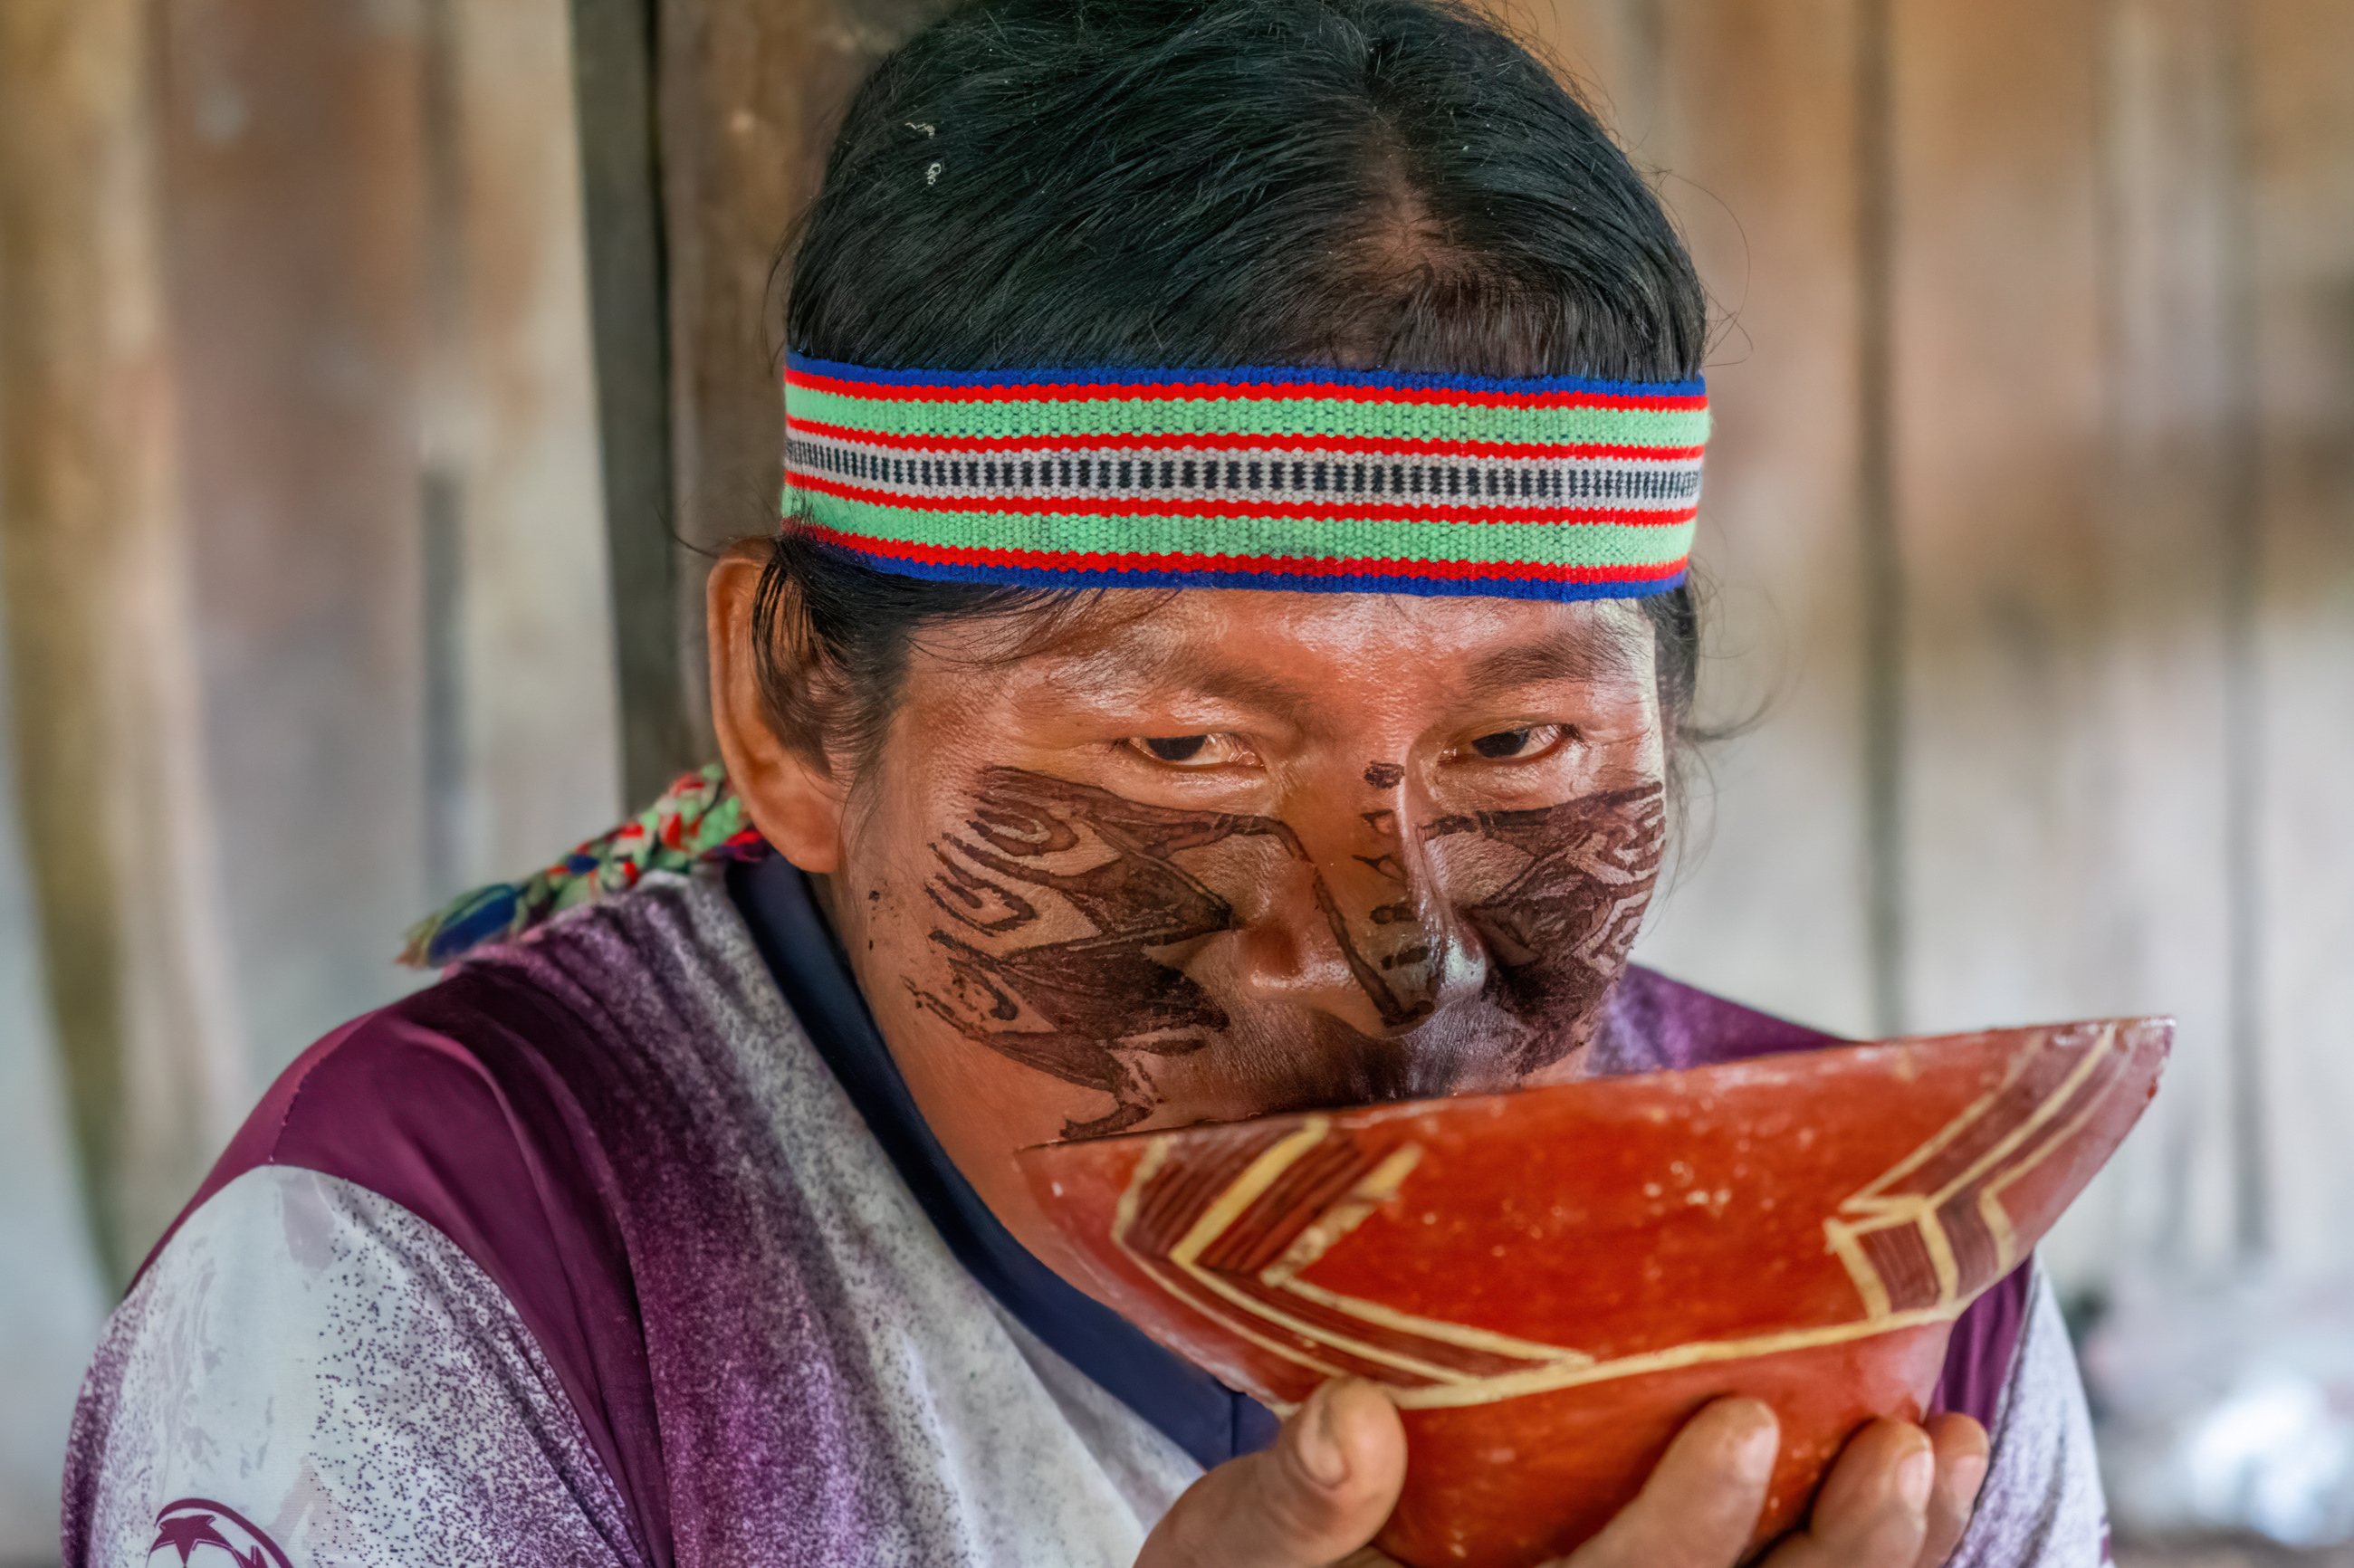 Achuar indigenous tribe chicha drink